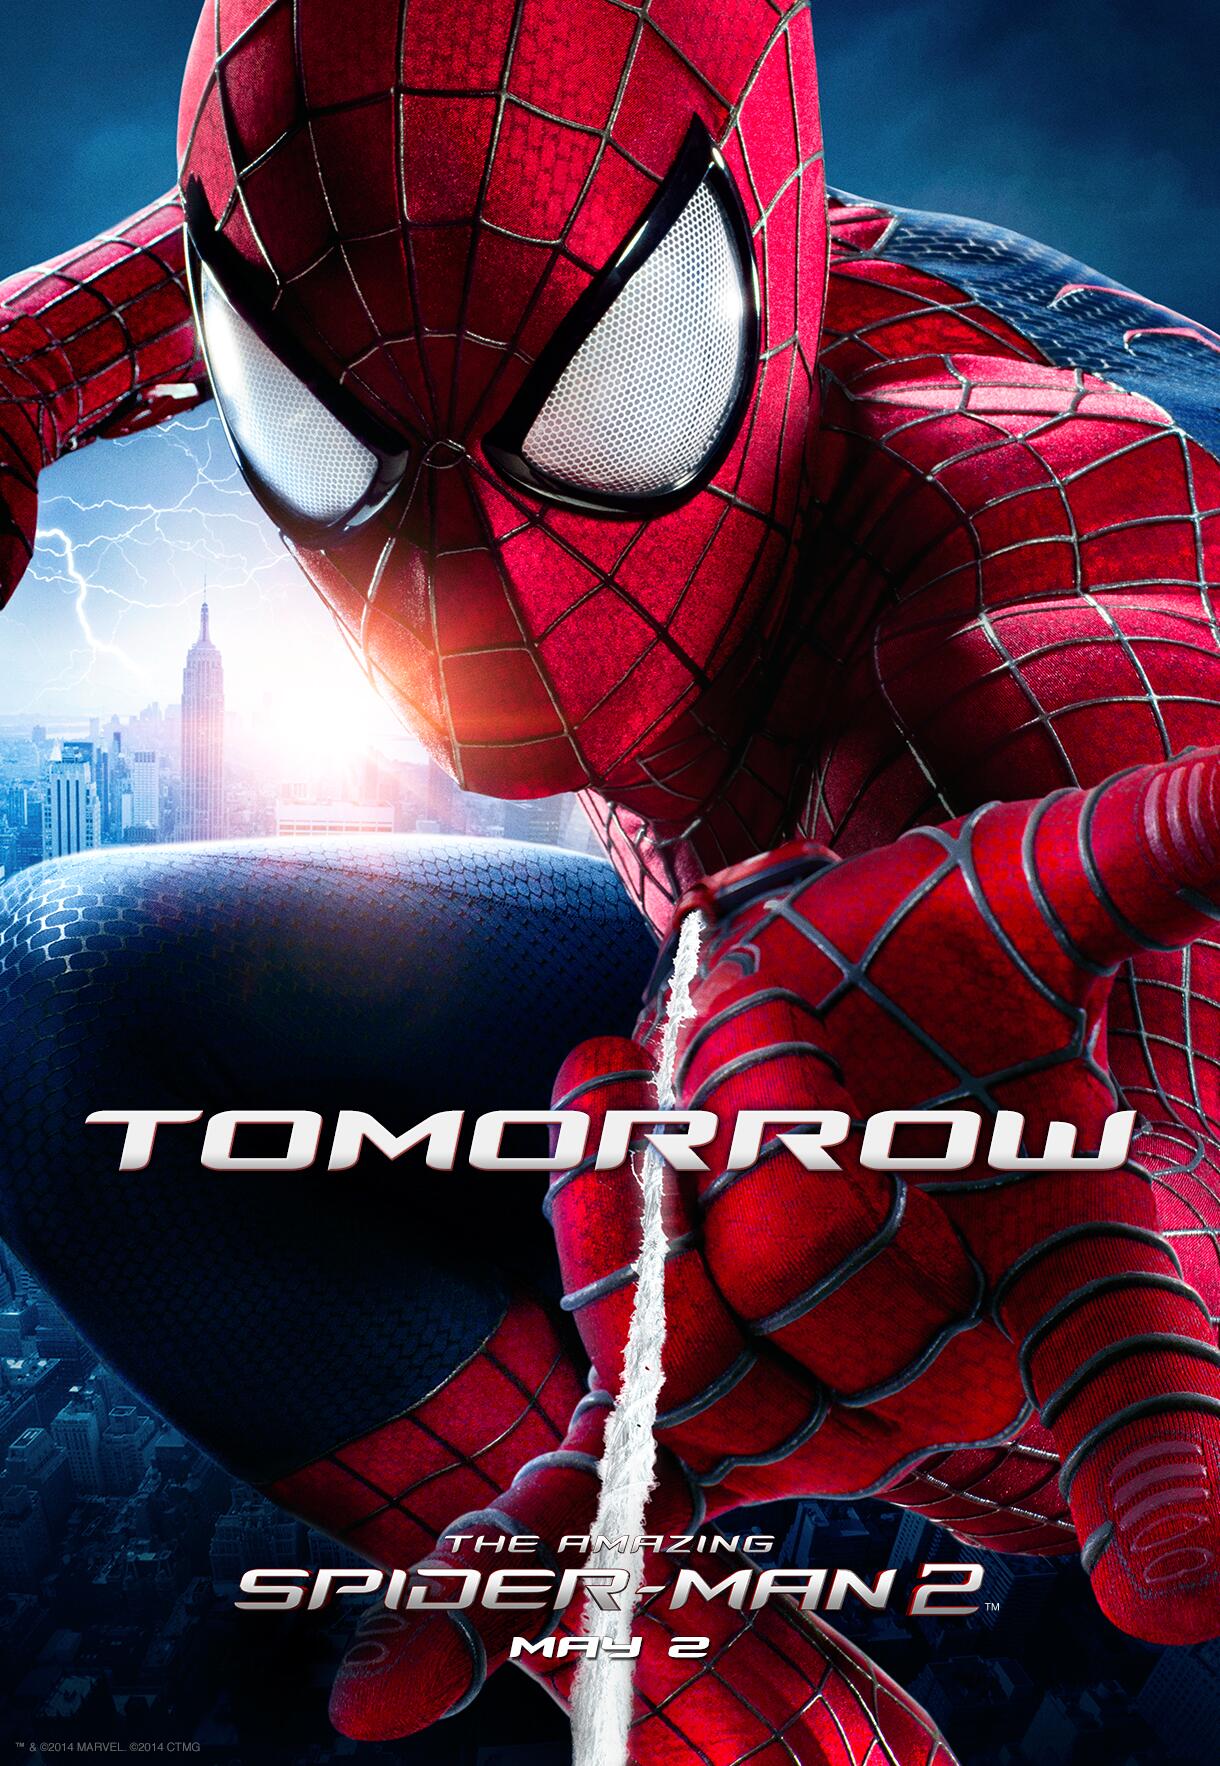 Spider Man No Way Home The Final Trailer Arrives Tomorrow Spiderman Http T Co 7xhxjsee5r